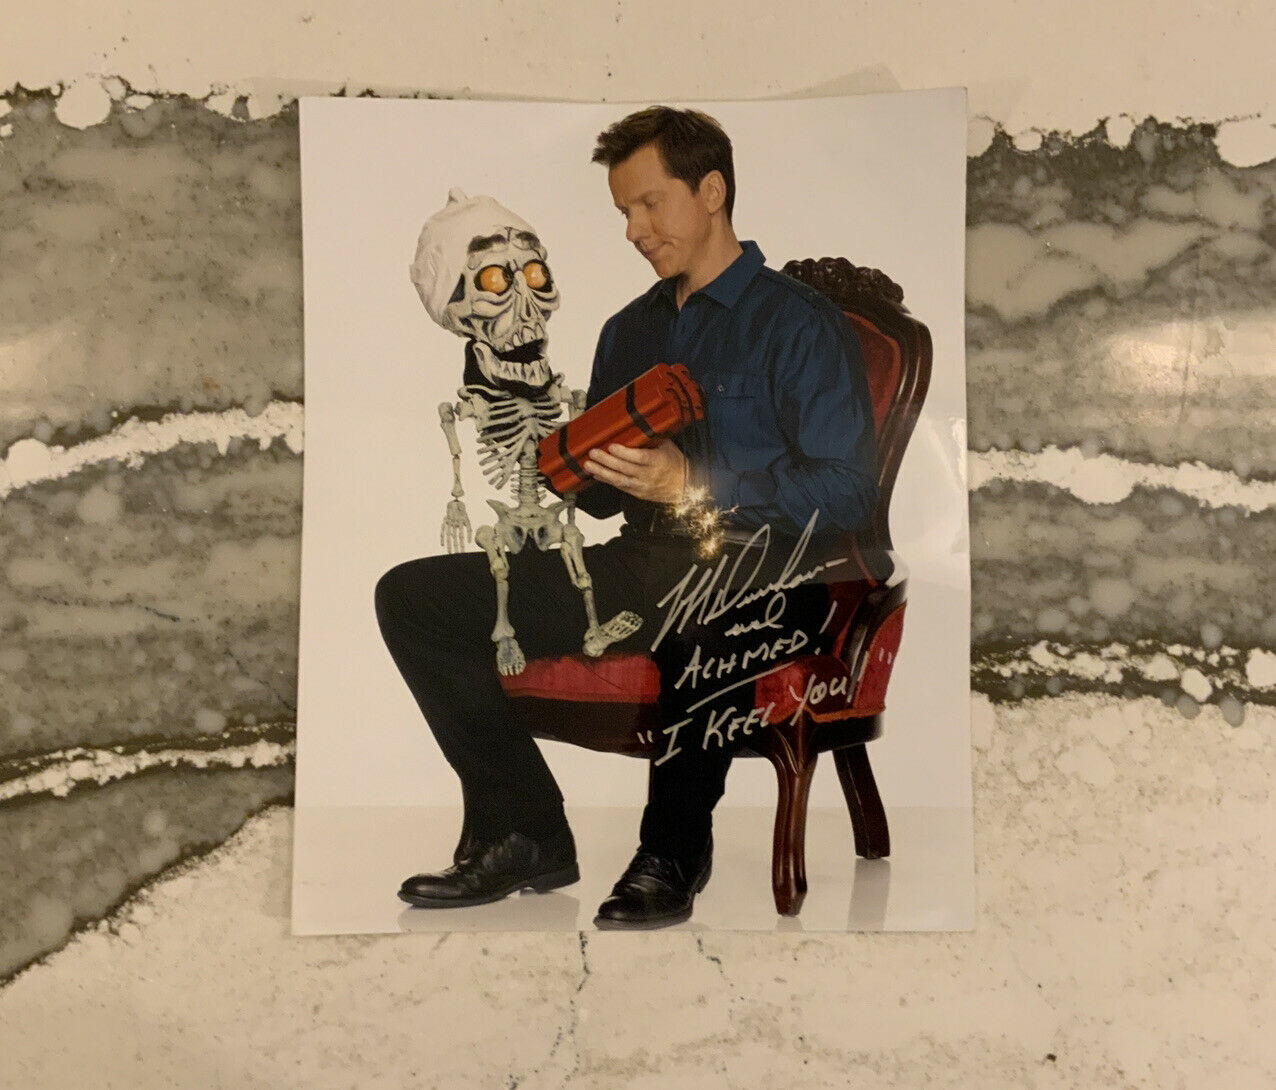 REPRINT - JEFF DUNHAM Comedian Autographed Signed 8 x 10 Photo “I Keel You” New!